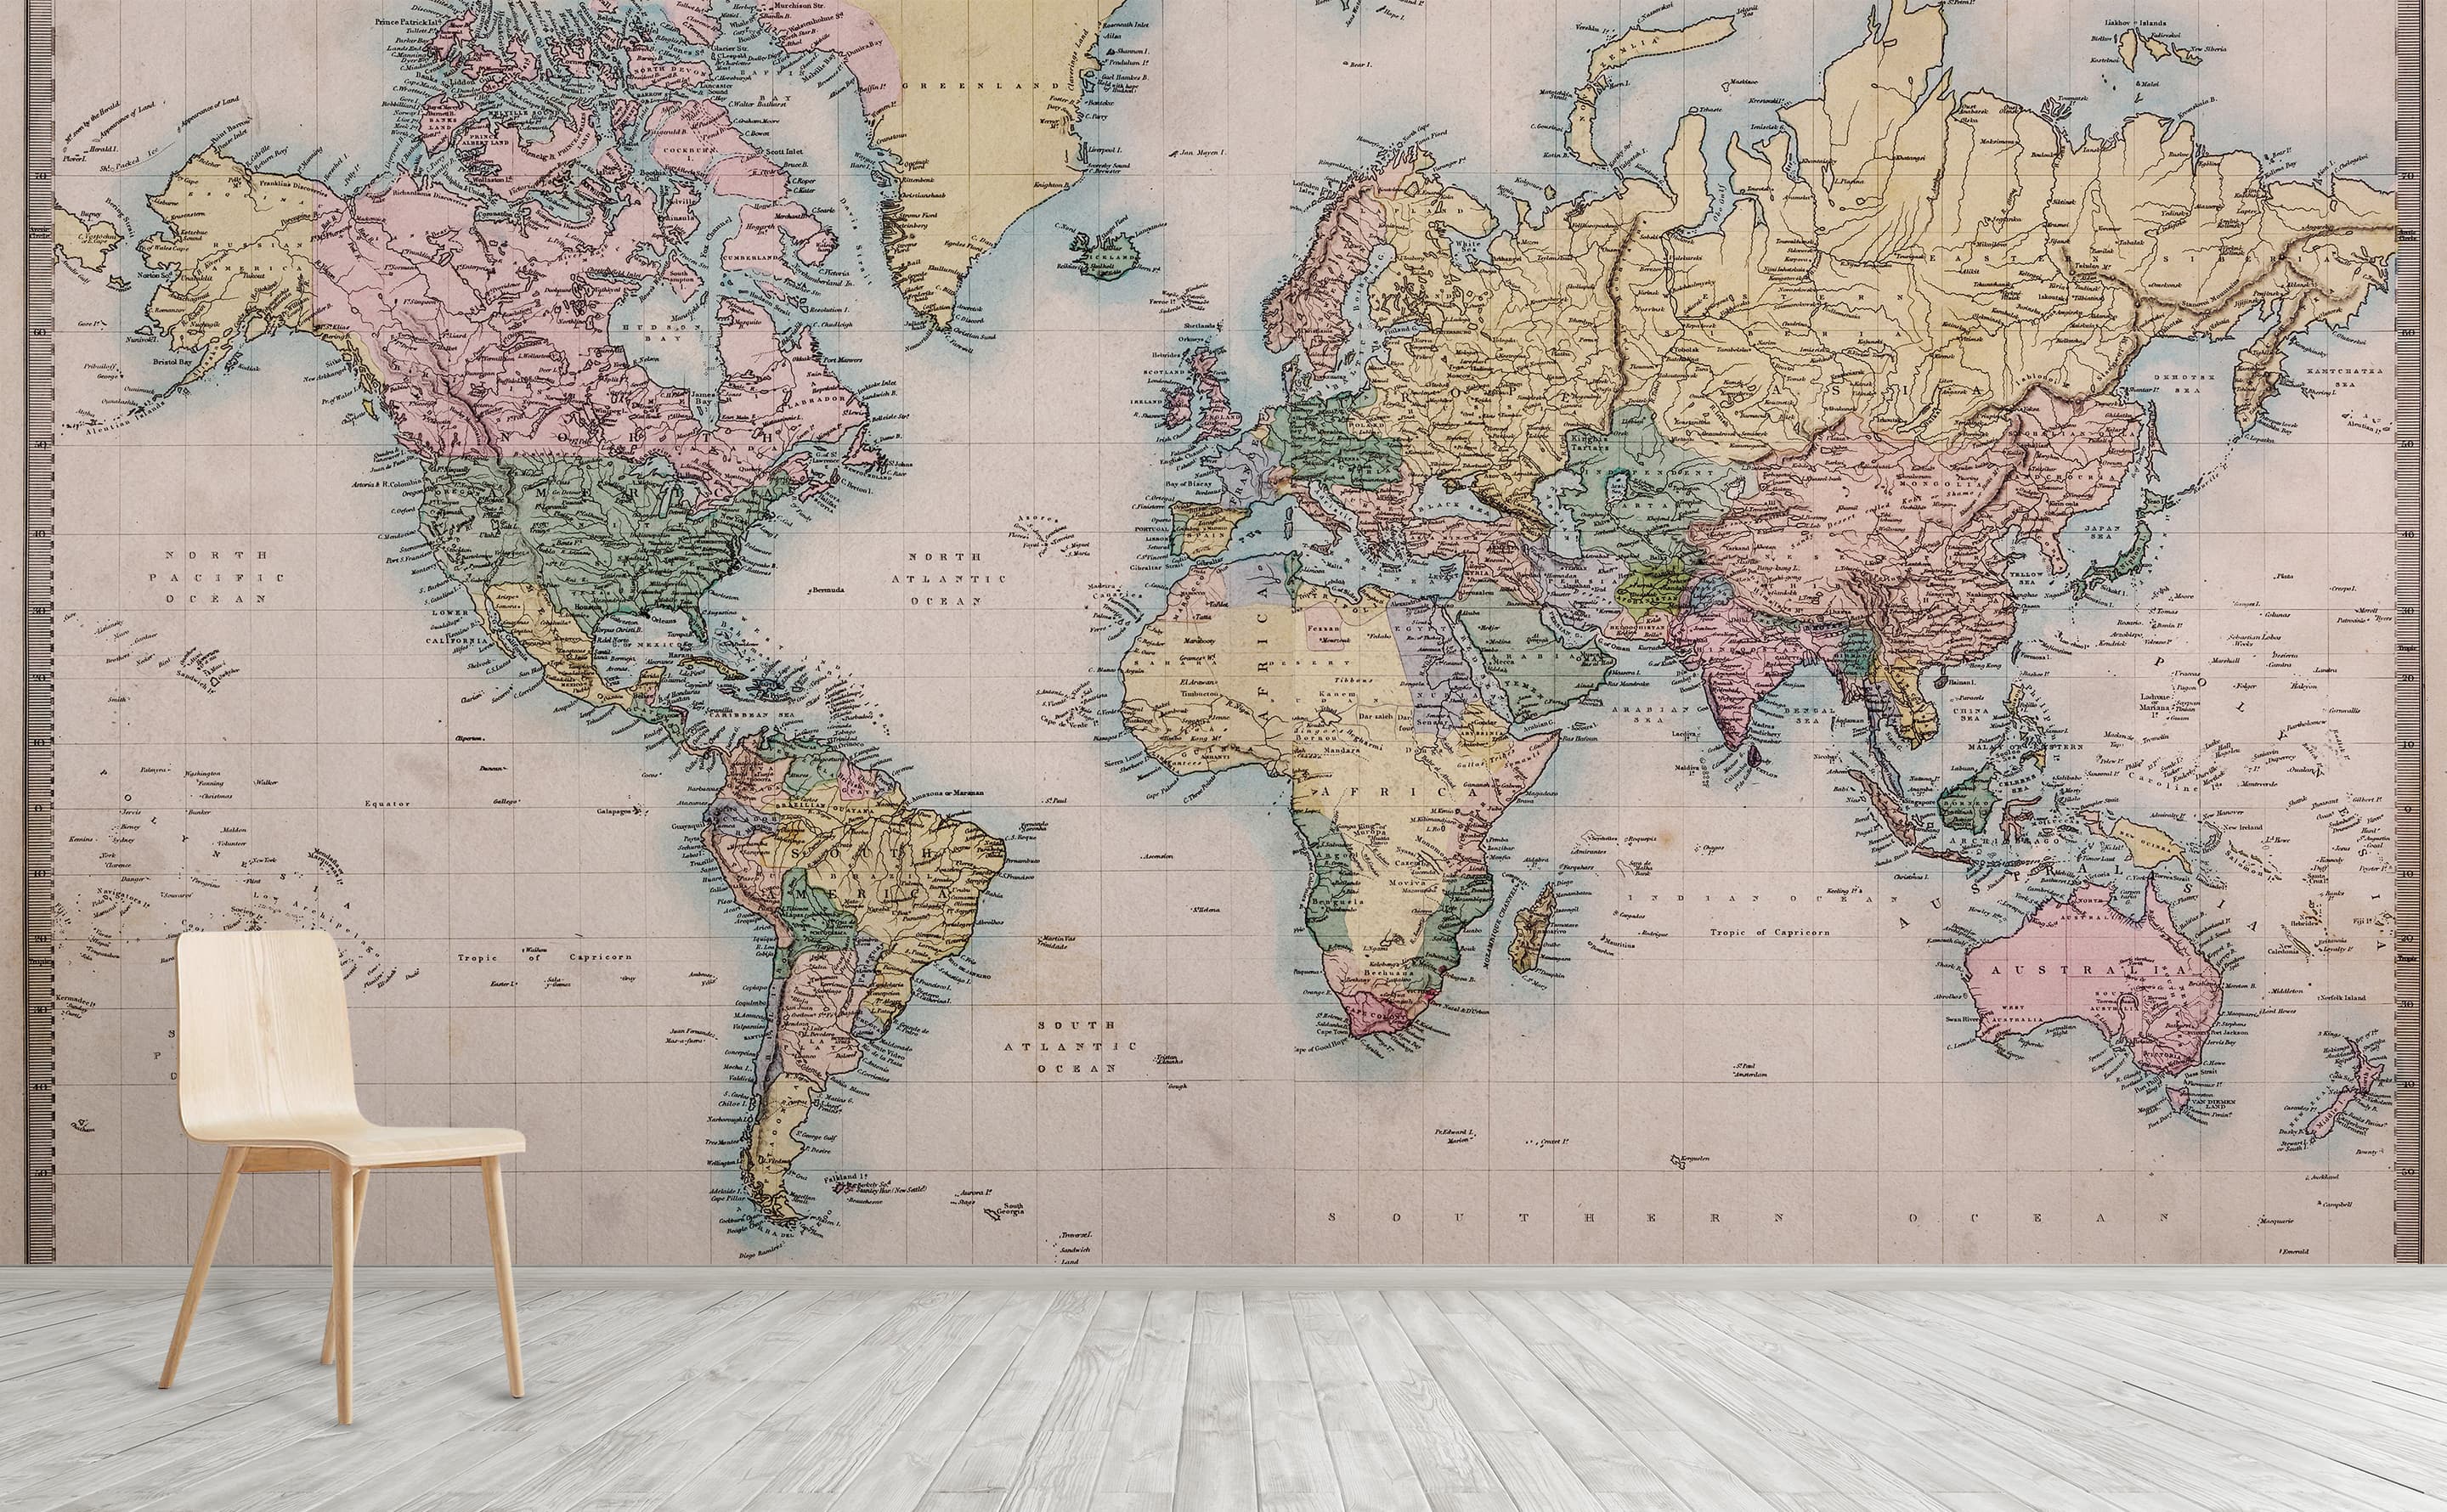 Vintage World Atlas Map Wall Mural Fabric Decal